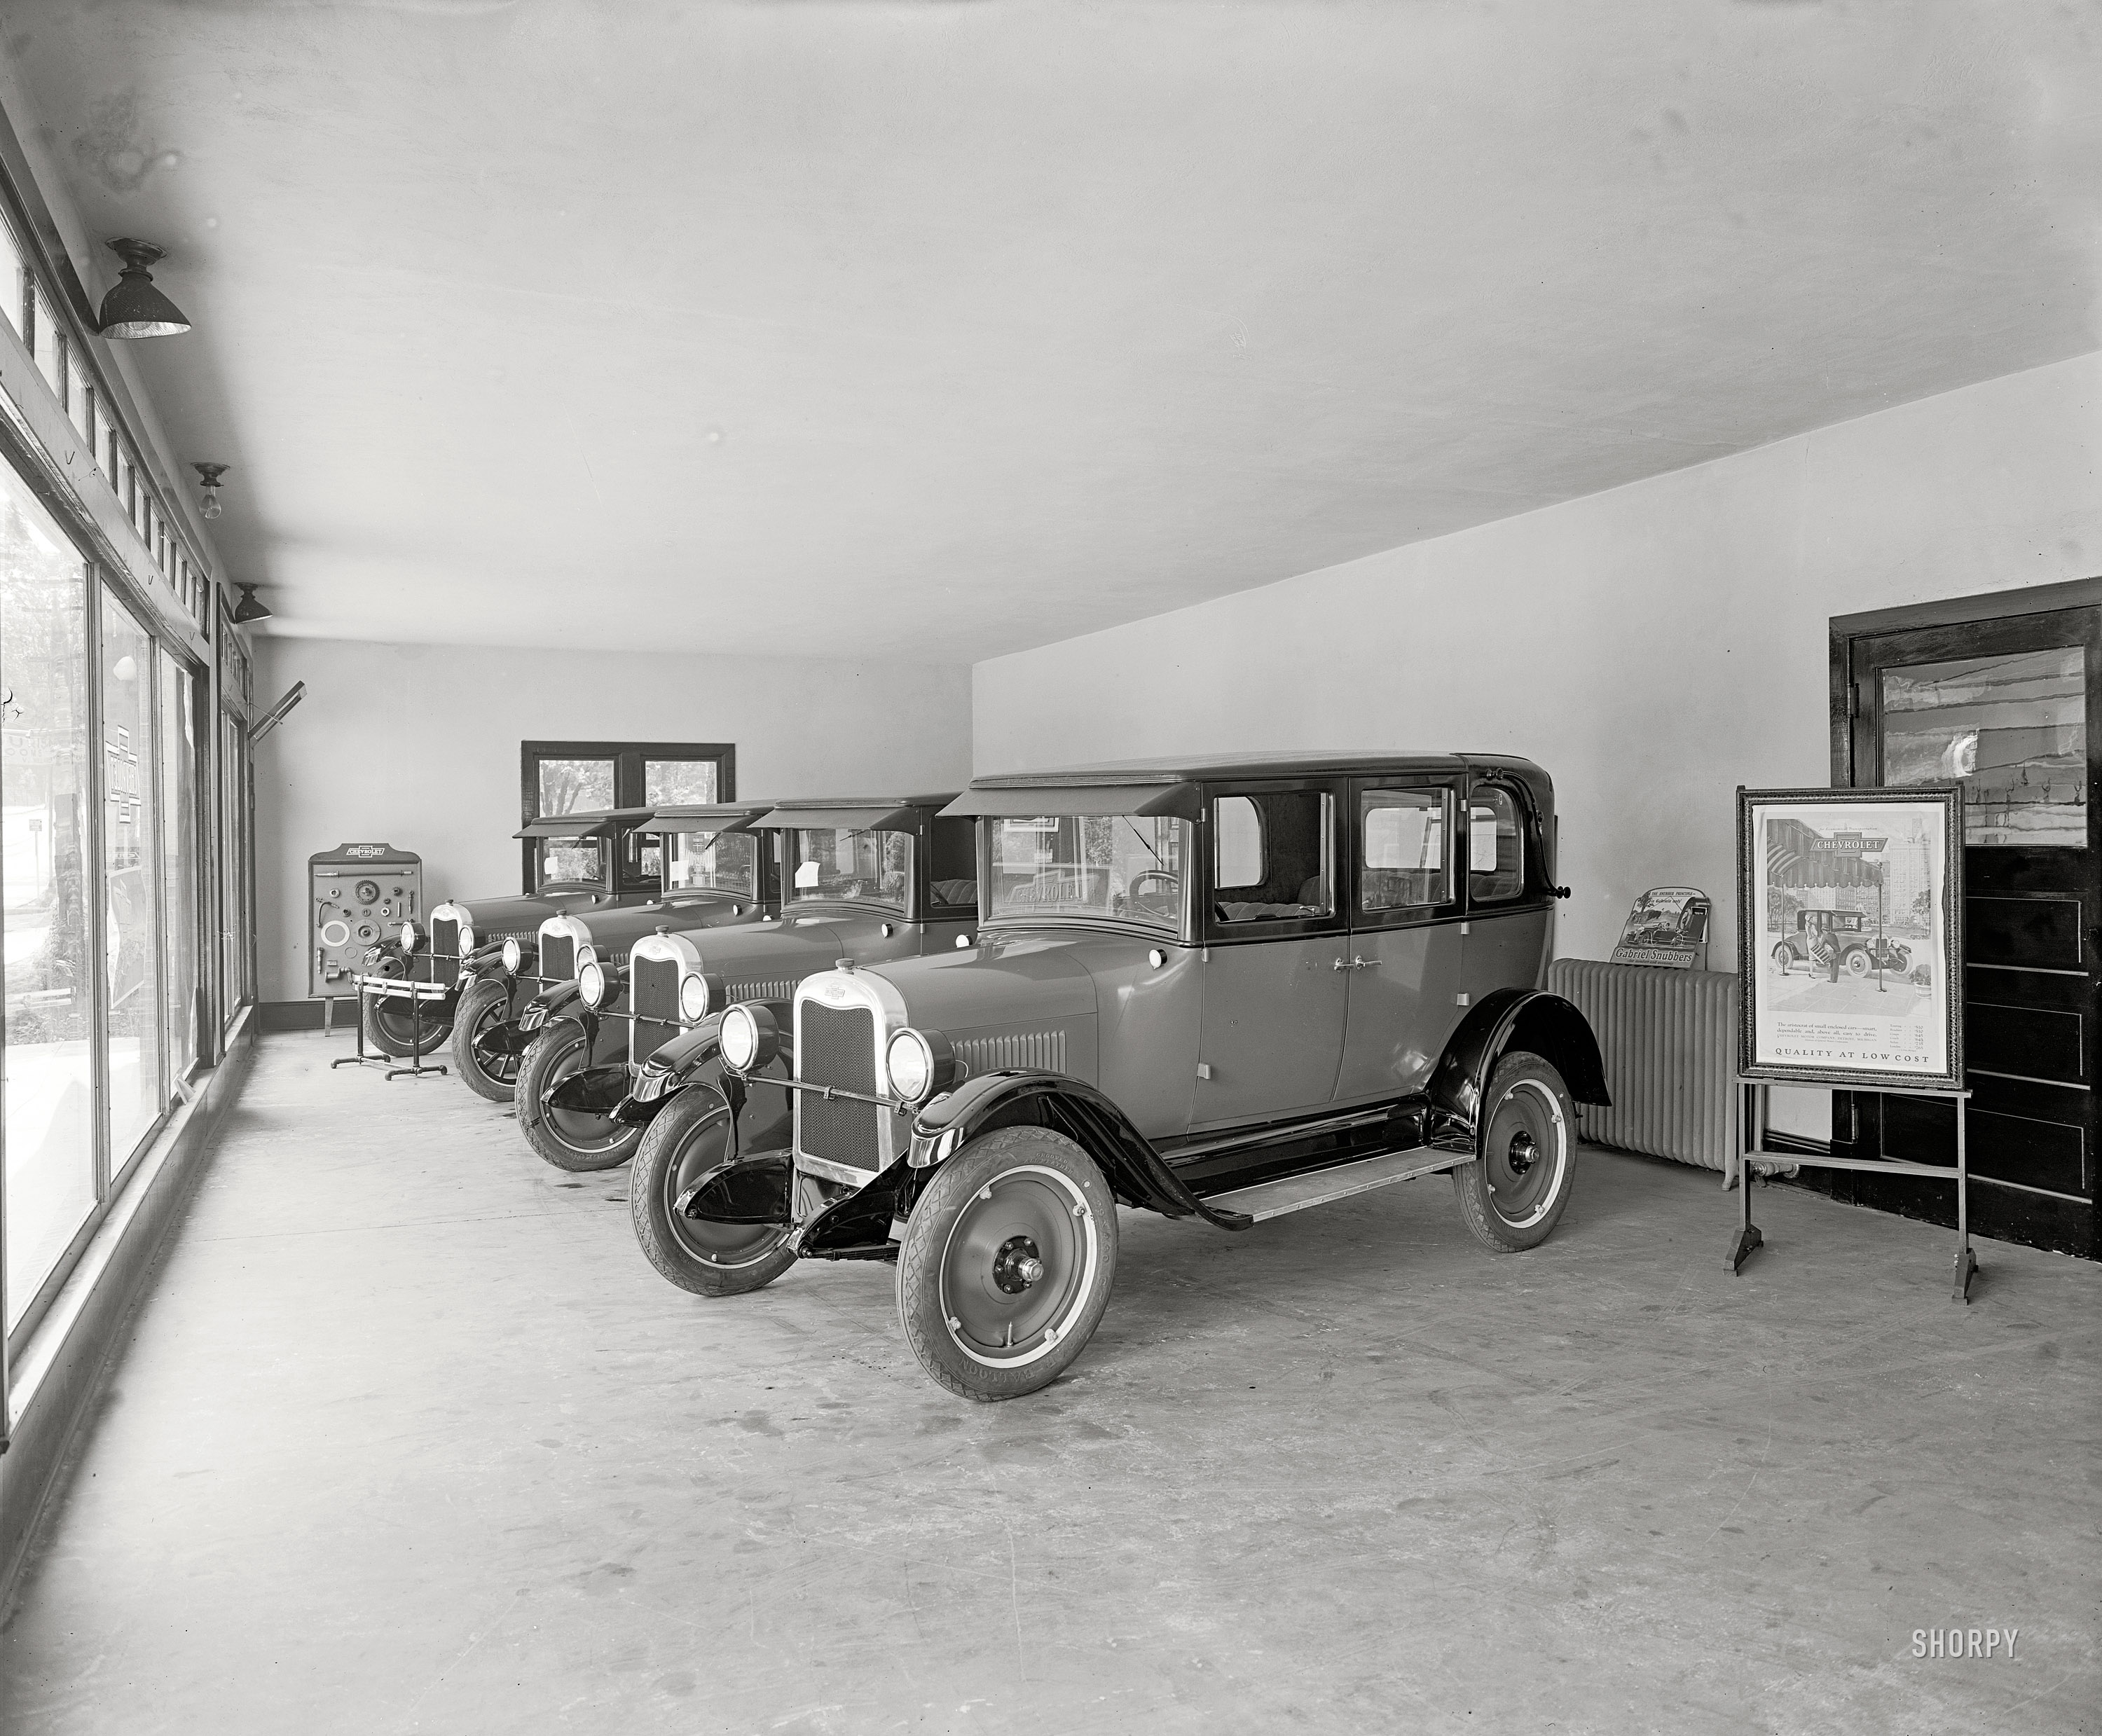 Rockville, Maryland, circa 1926. "Montgomery County Motor Co." Headquarters for "quality at low cost."  National Photo Co. glass negative. View full size.